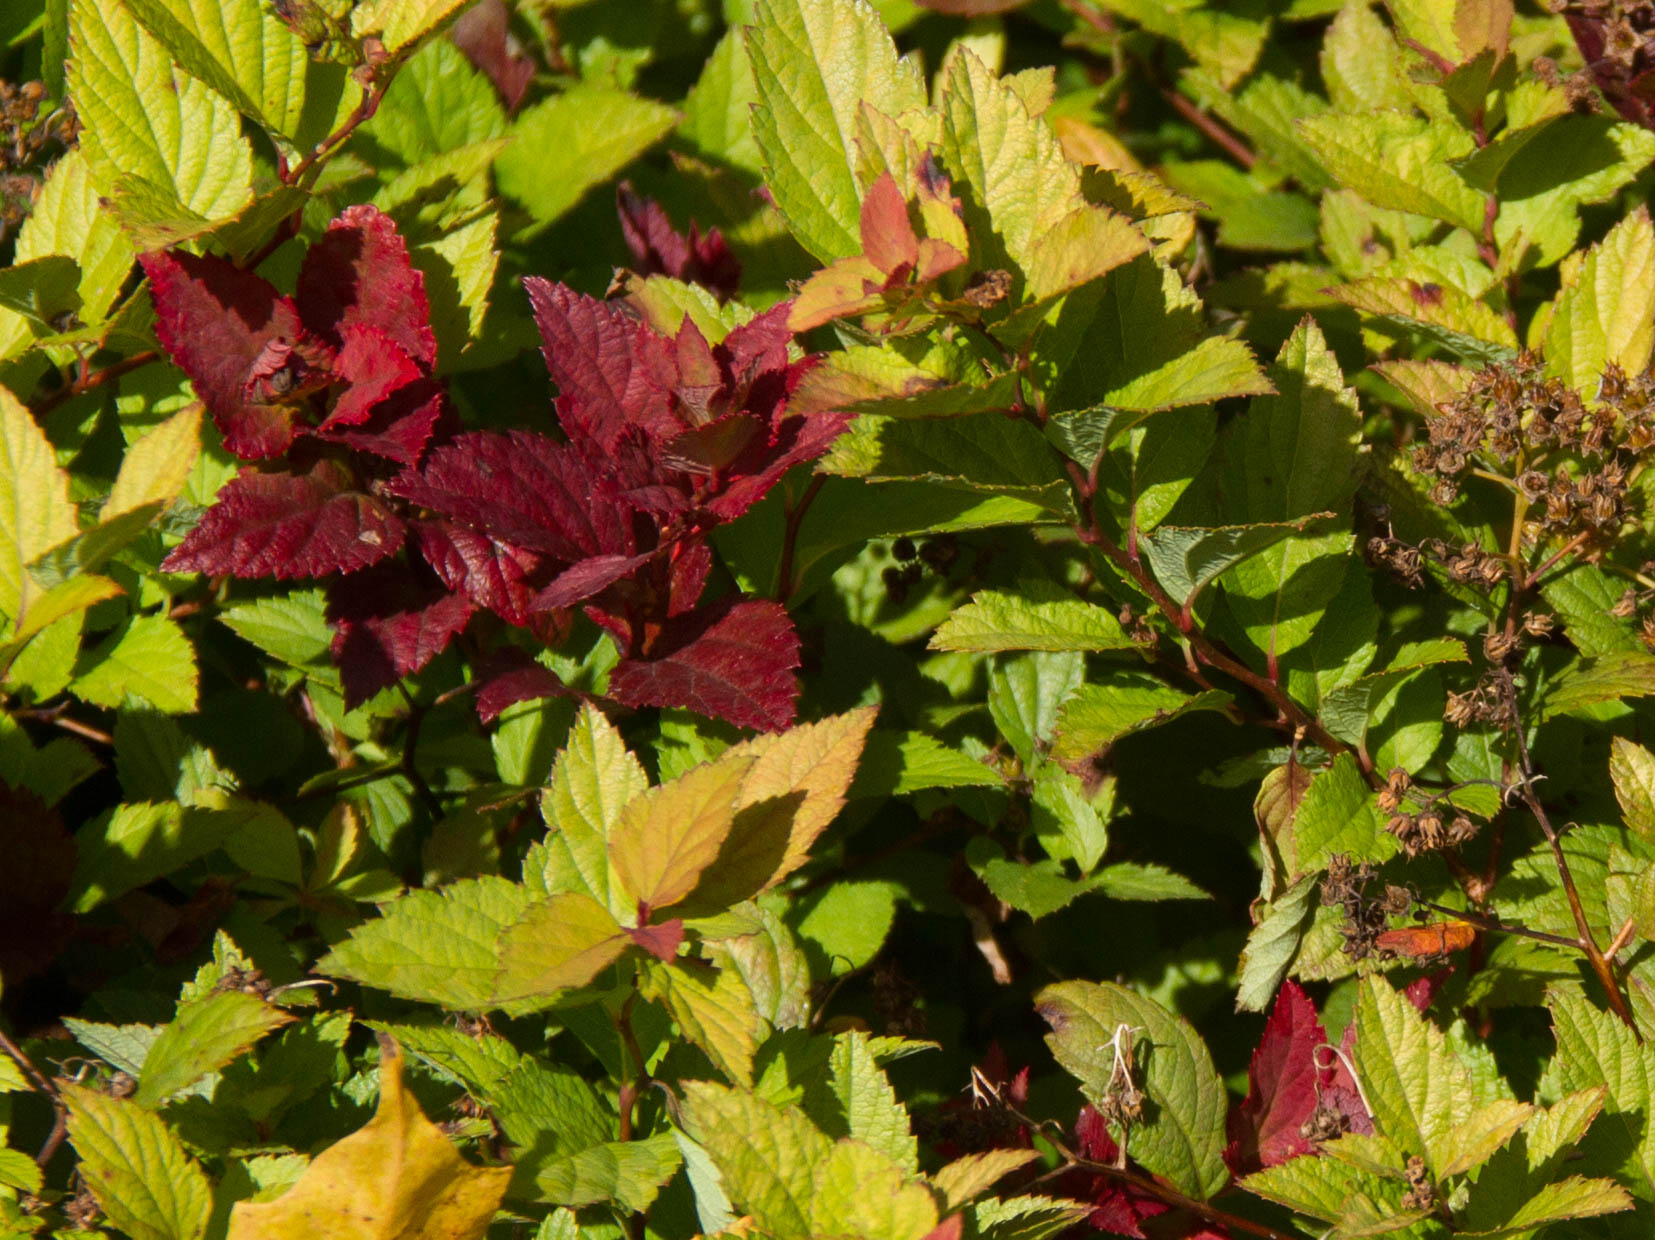 The reds, yellows and greens of Spirea japonica 'Magic Carpet' take us for an autumn ride.